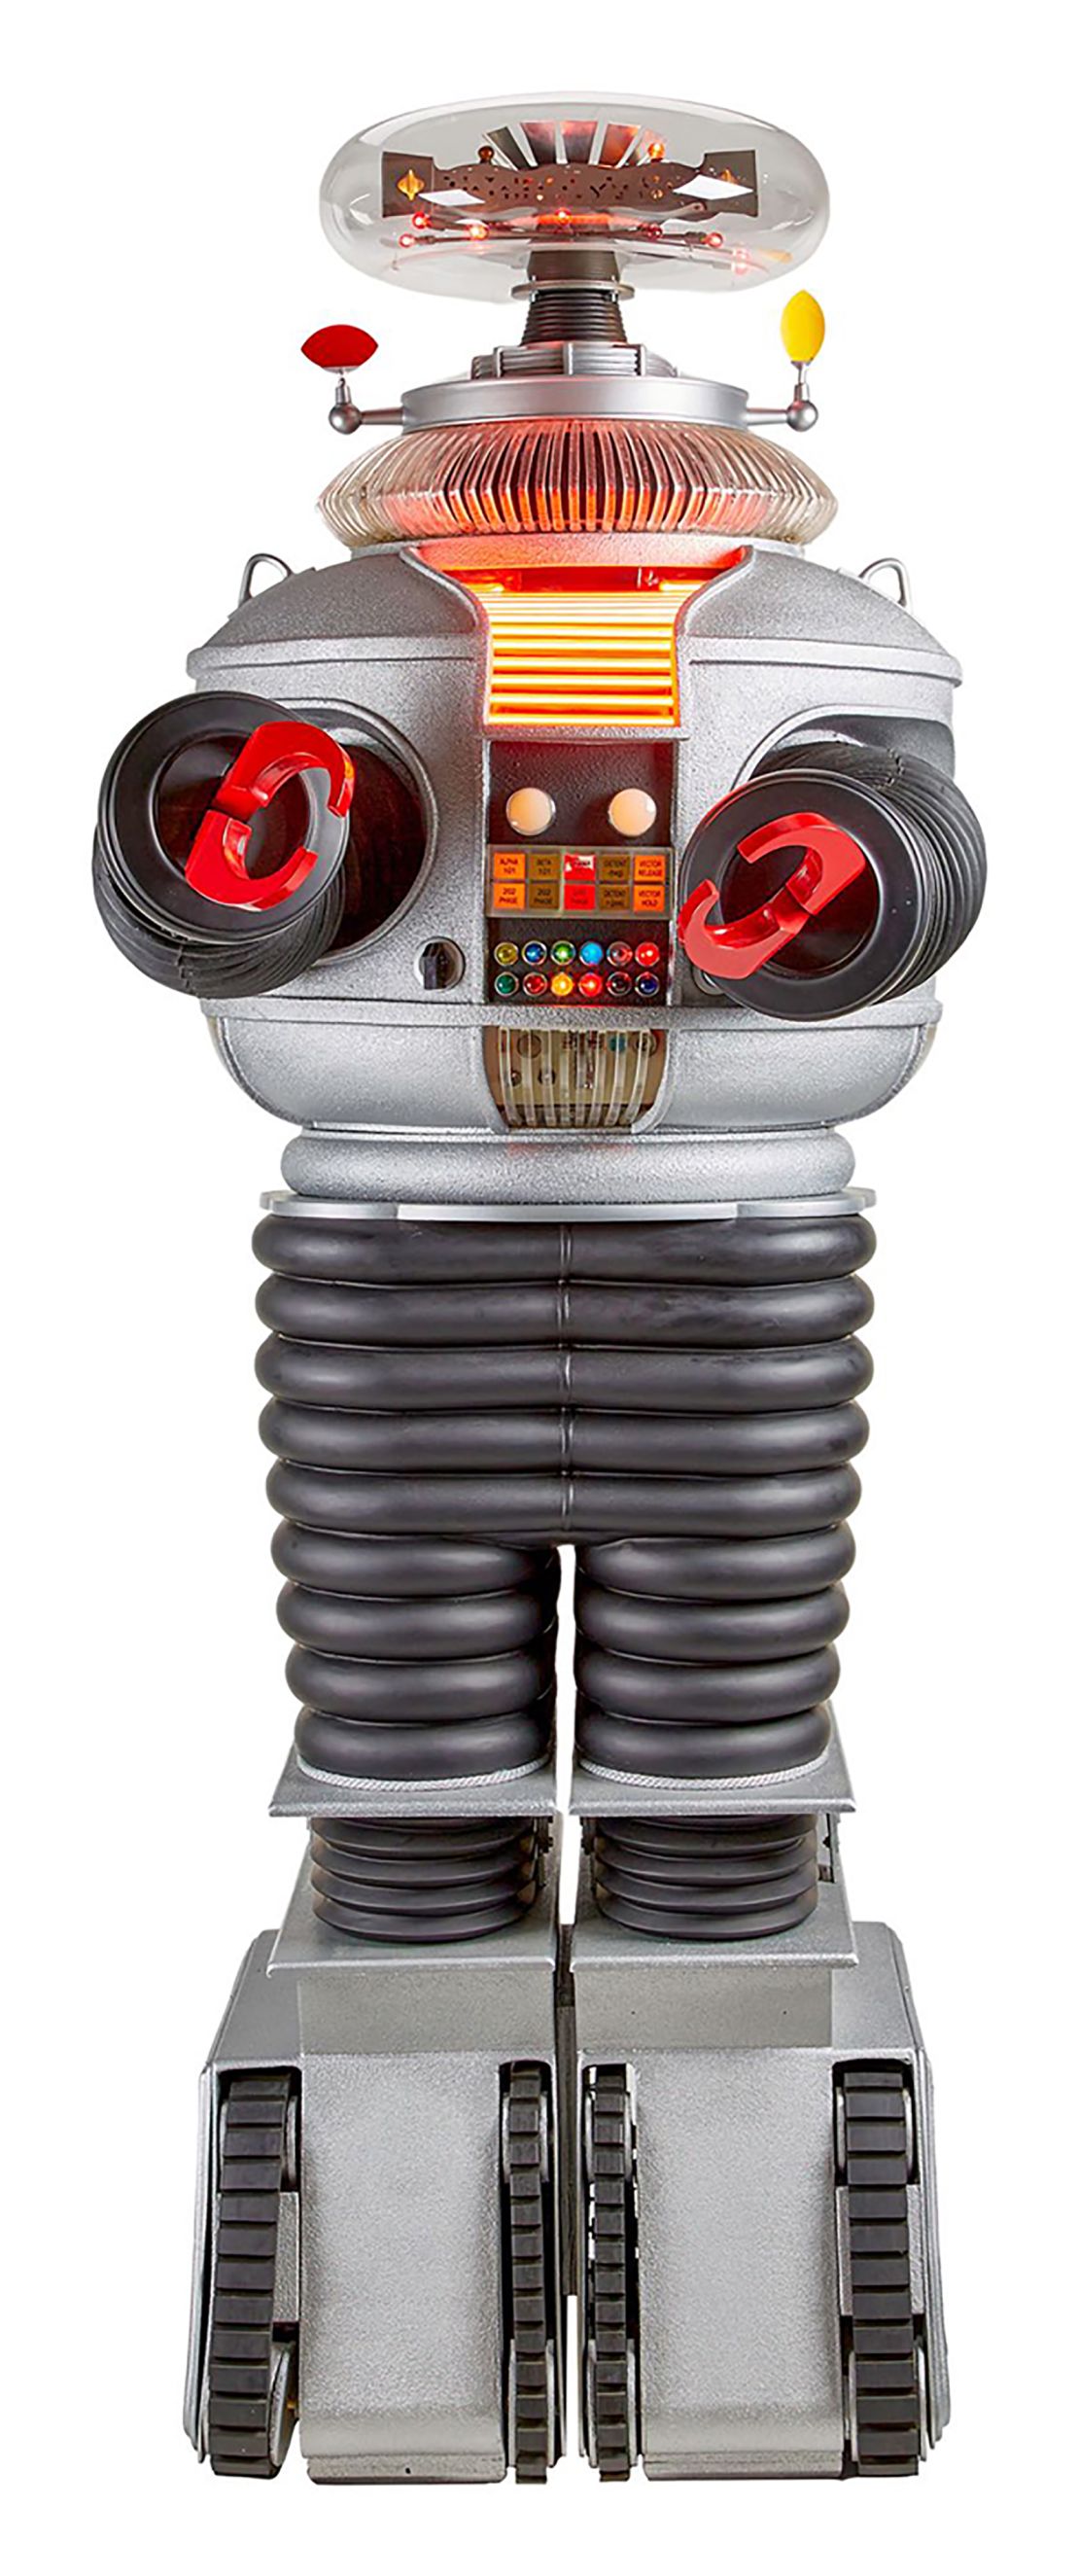 This sale will feature one of the most famous and legendary robots of all time, Model B-9 "The Robot" from the pioneering science fiction series of the 1960s, Lost In Space (Estimate: $300,000 - $500,000). One of only two full-scale figures that were made during the show's three-year run, this is one of the rarest artifacts from the era ever offered at auction which also is still functional.